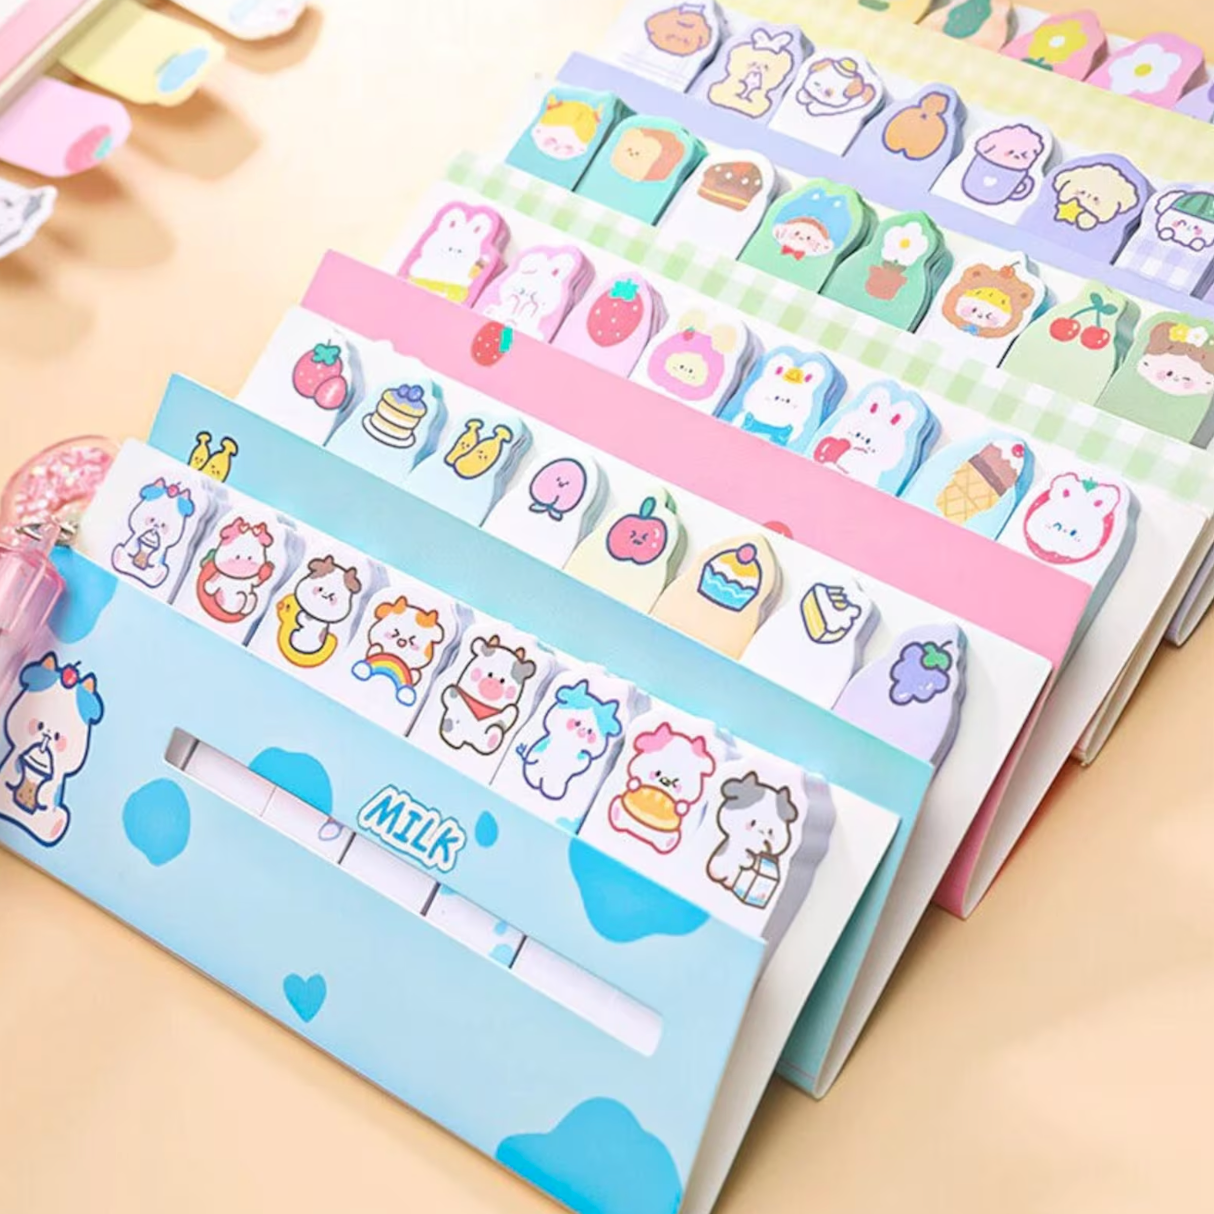 A selection of packs of pastel stick tabs, with cute drawings of animals, food, and cartoon creatures.